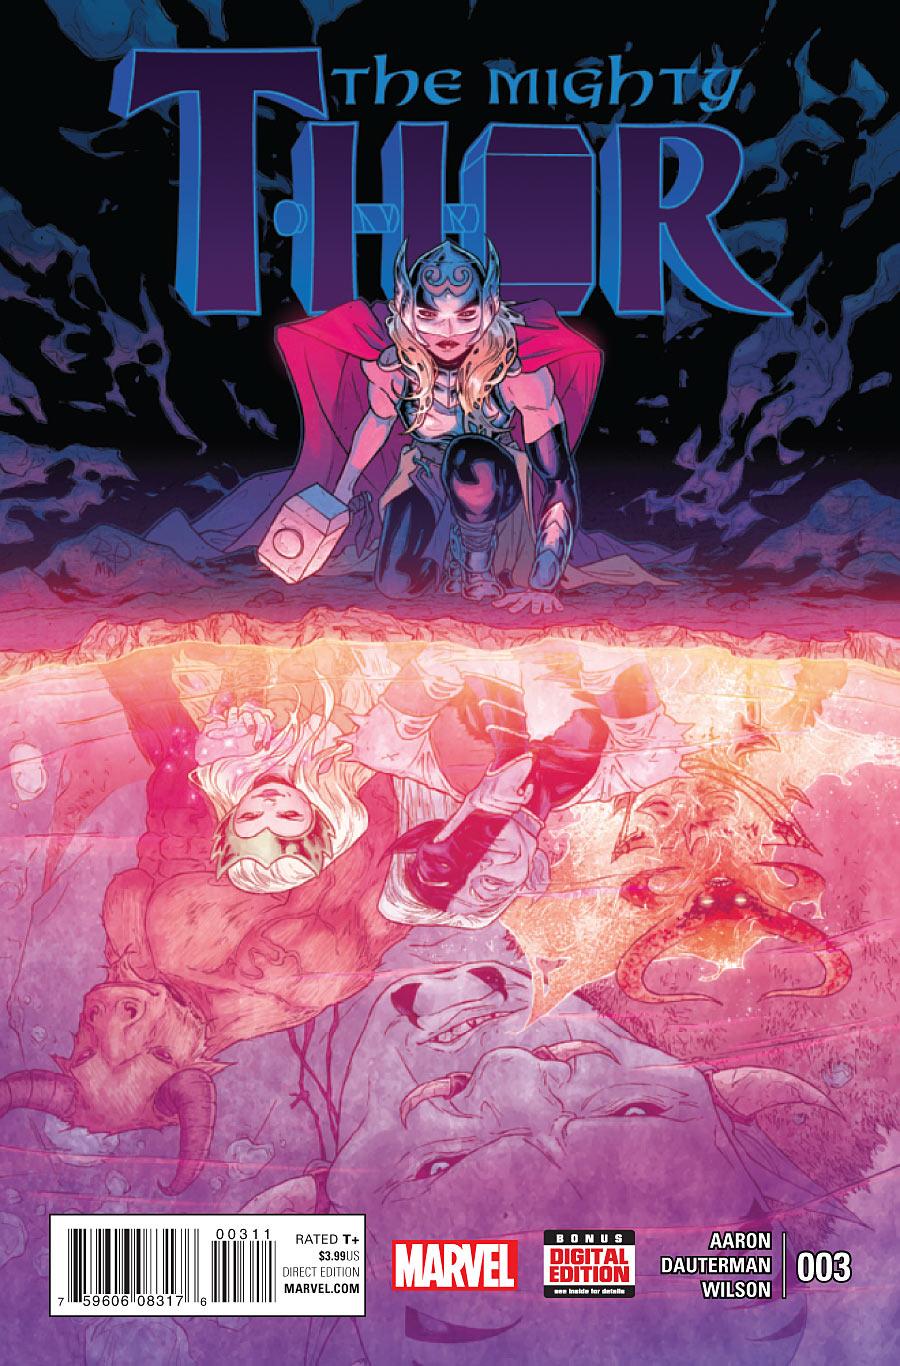 The Mighty Thor Vol. 2 #3